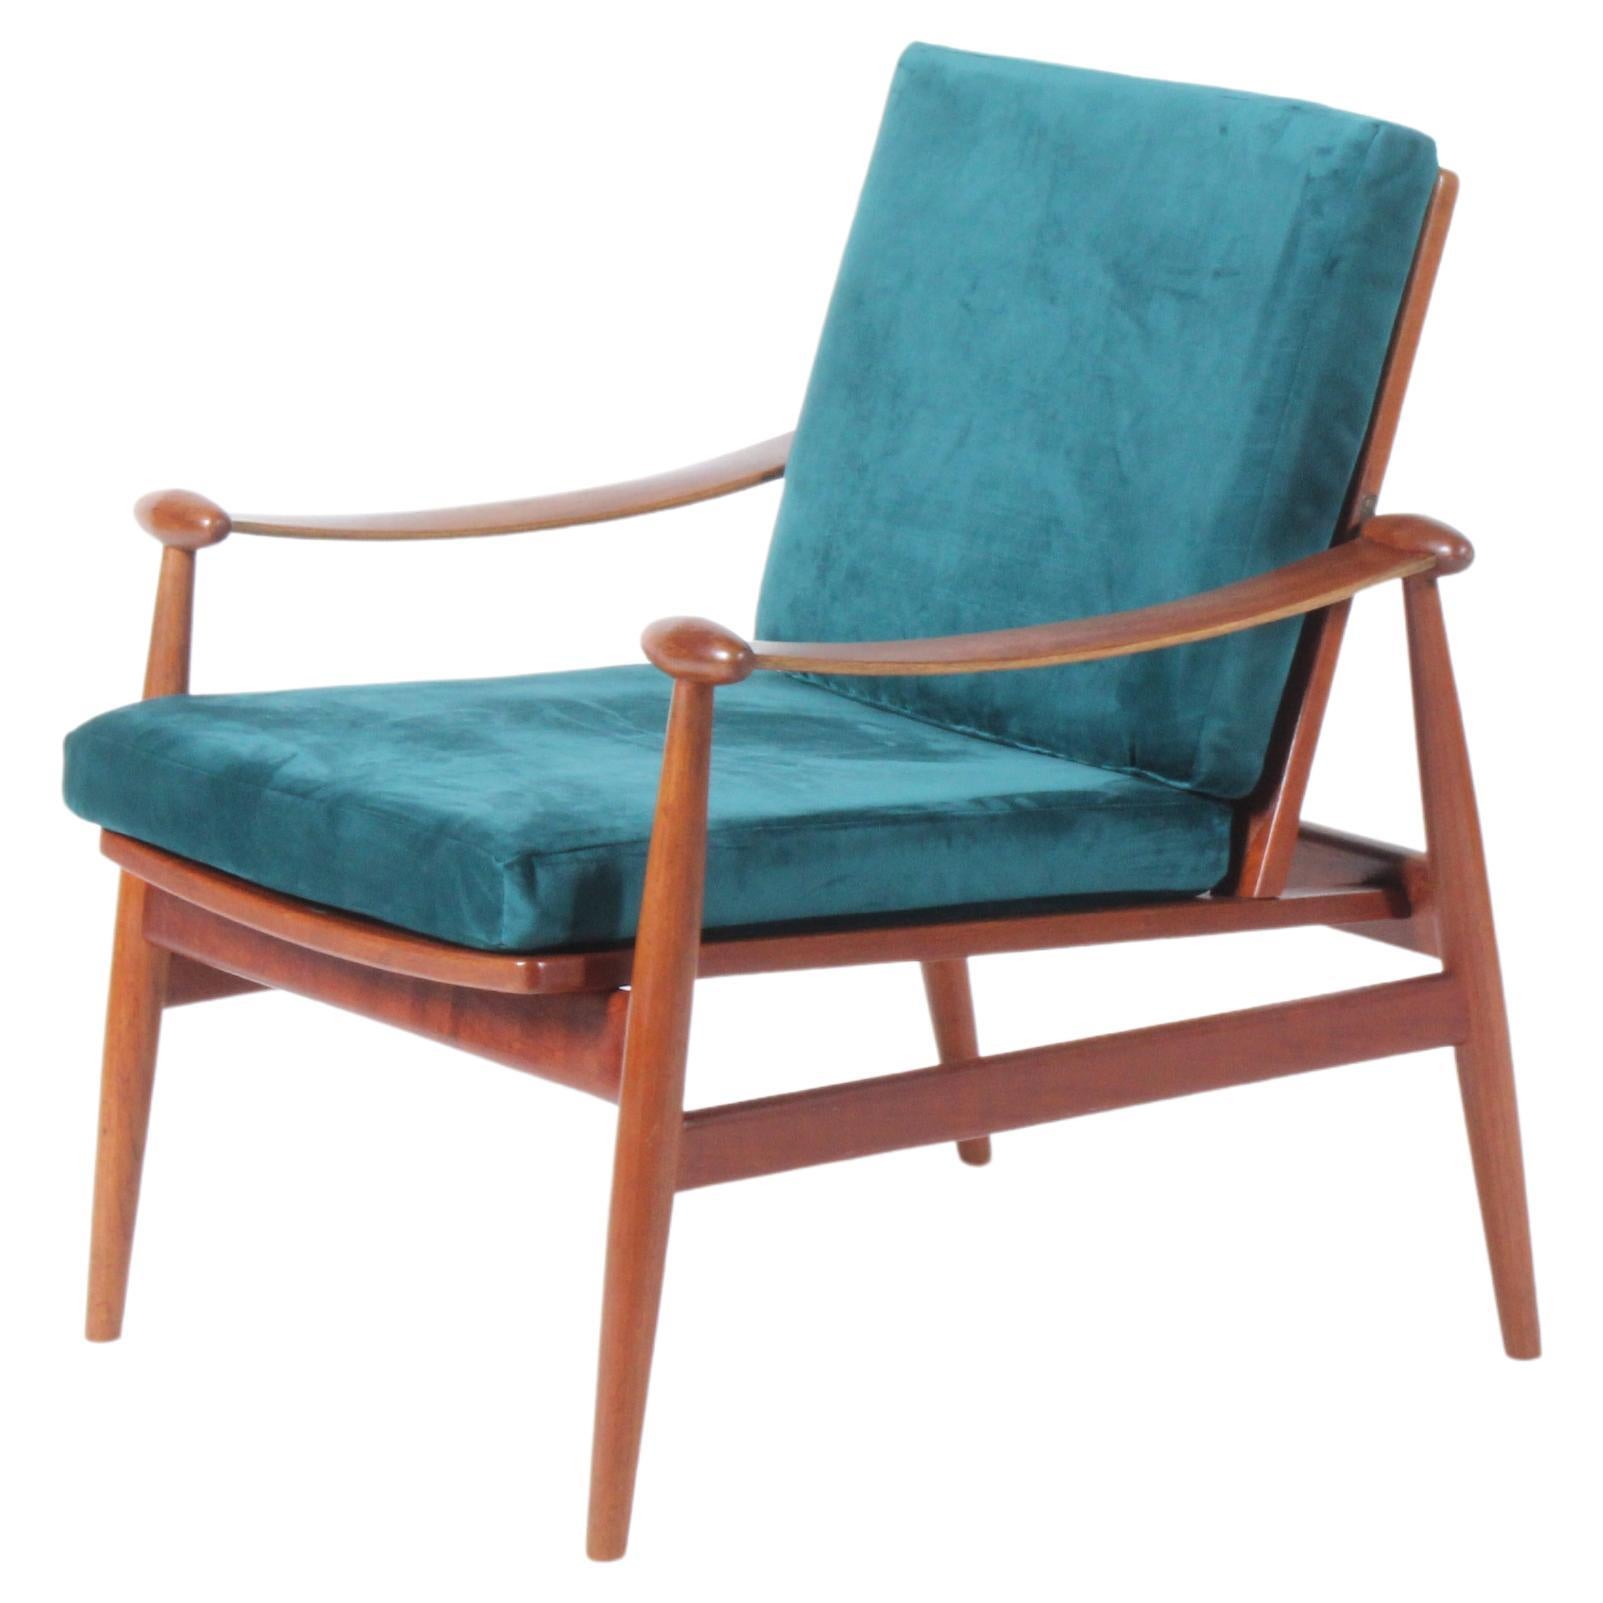 Exquisite Mid Century Danish Spade Chair By Finn Juhl For France & Son In Teak For Sale